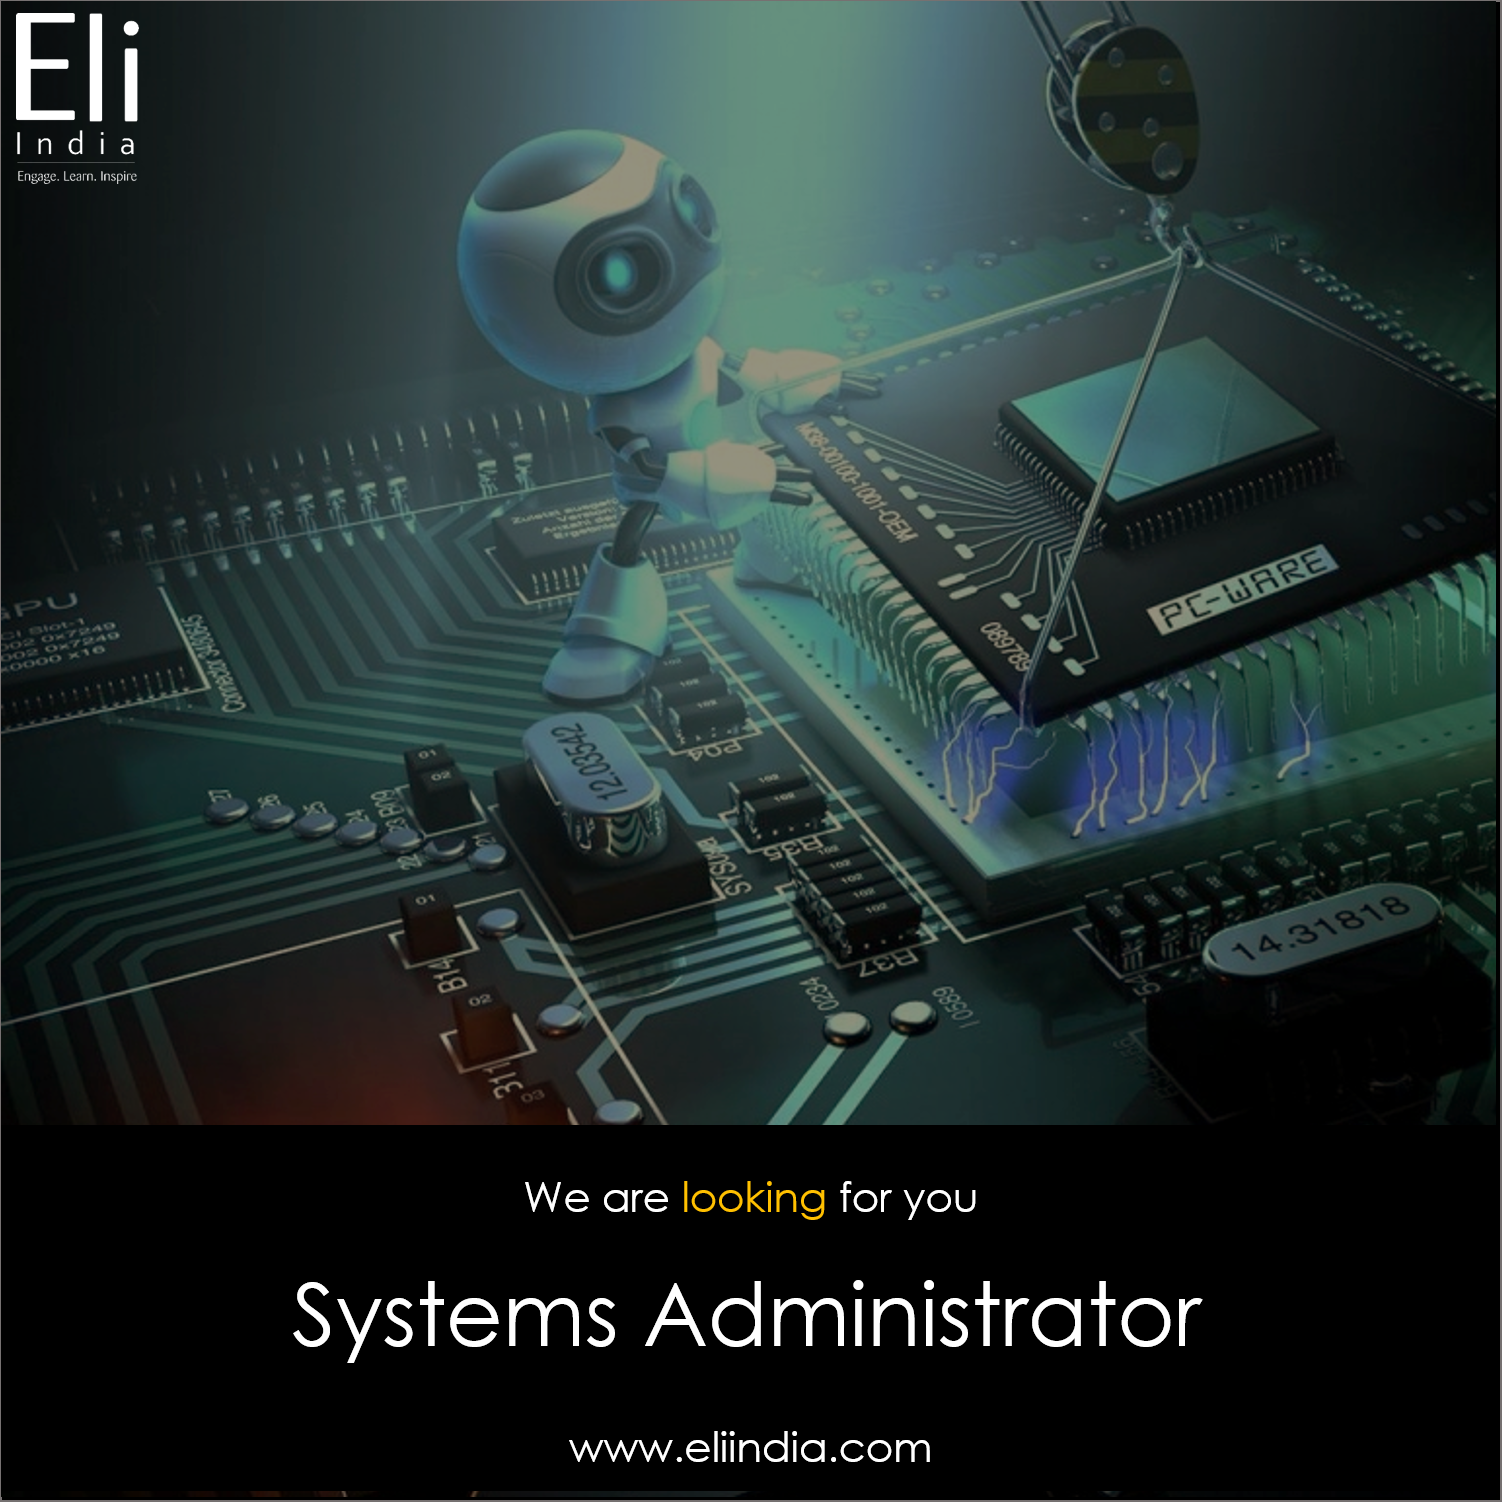 Systems Administrator Jobs and Openings Chennai India. Technology wallpaper, Electronic engineering, Electronics projects